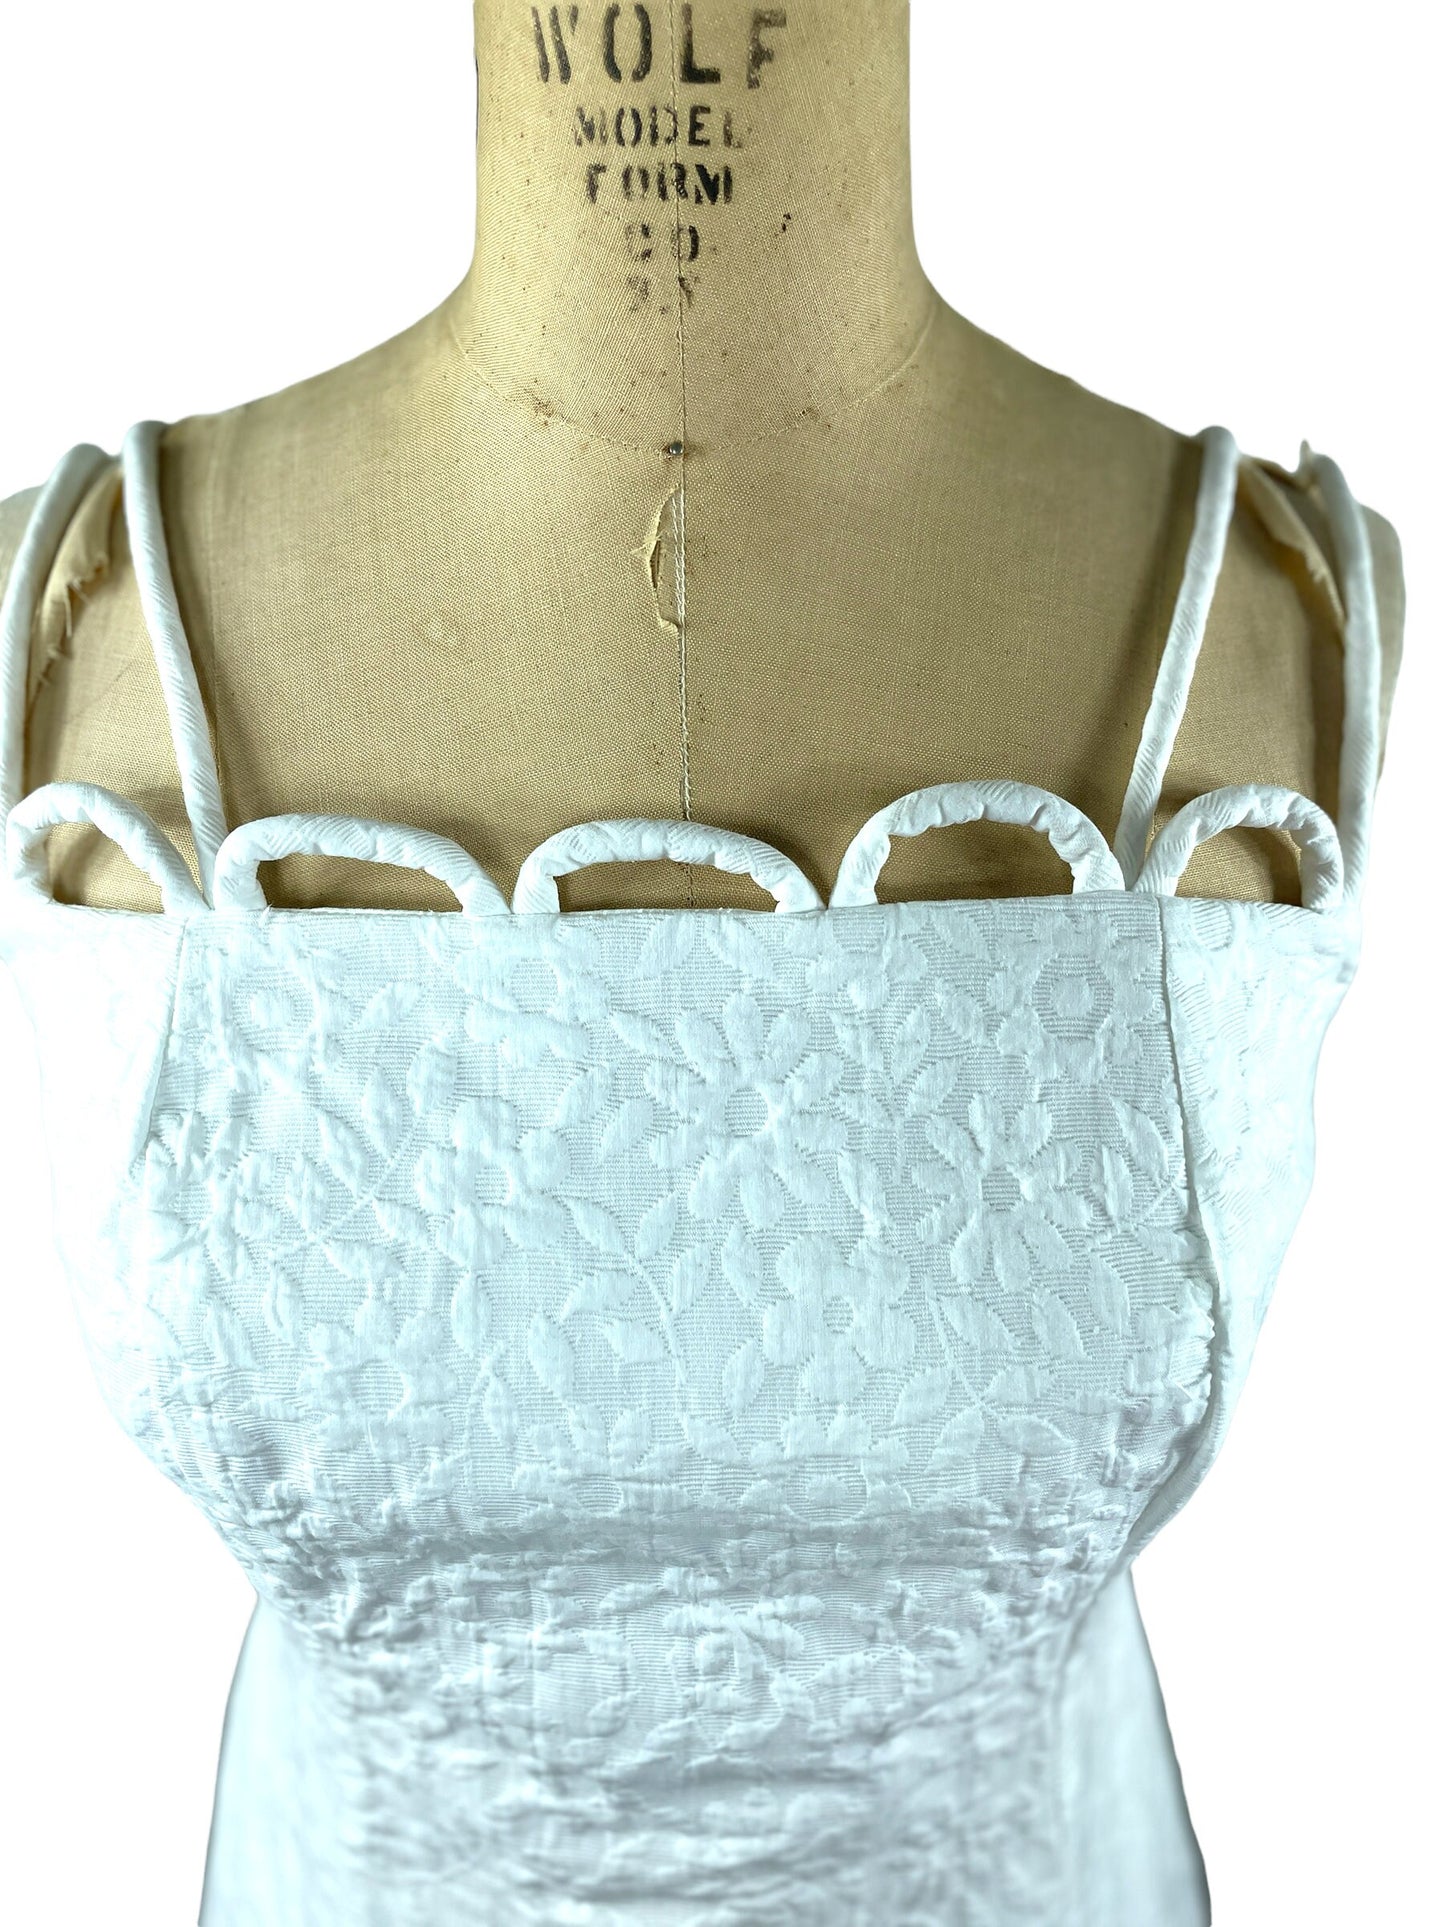 1970s white sundress with scalloped rope detailing and matelasse fabric by Neiman Marcus Size S/M